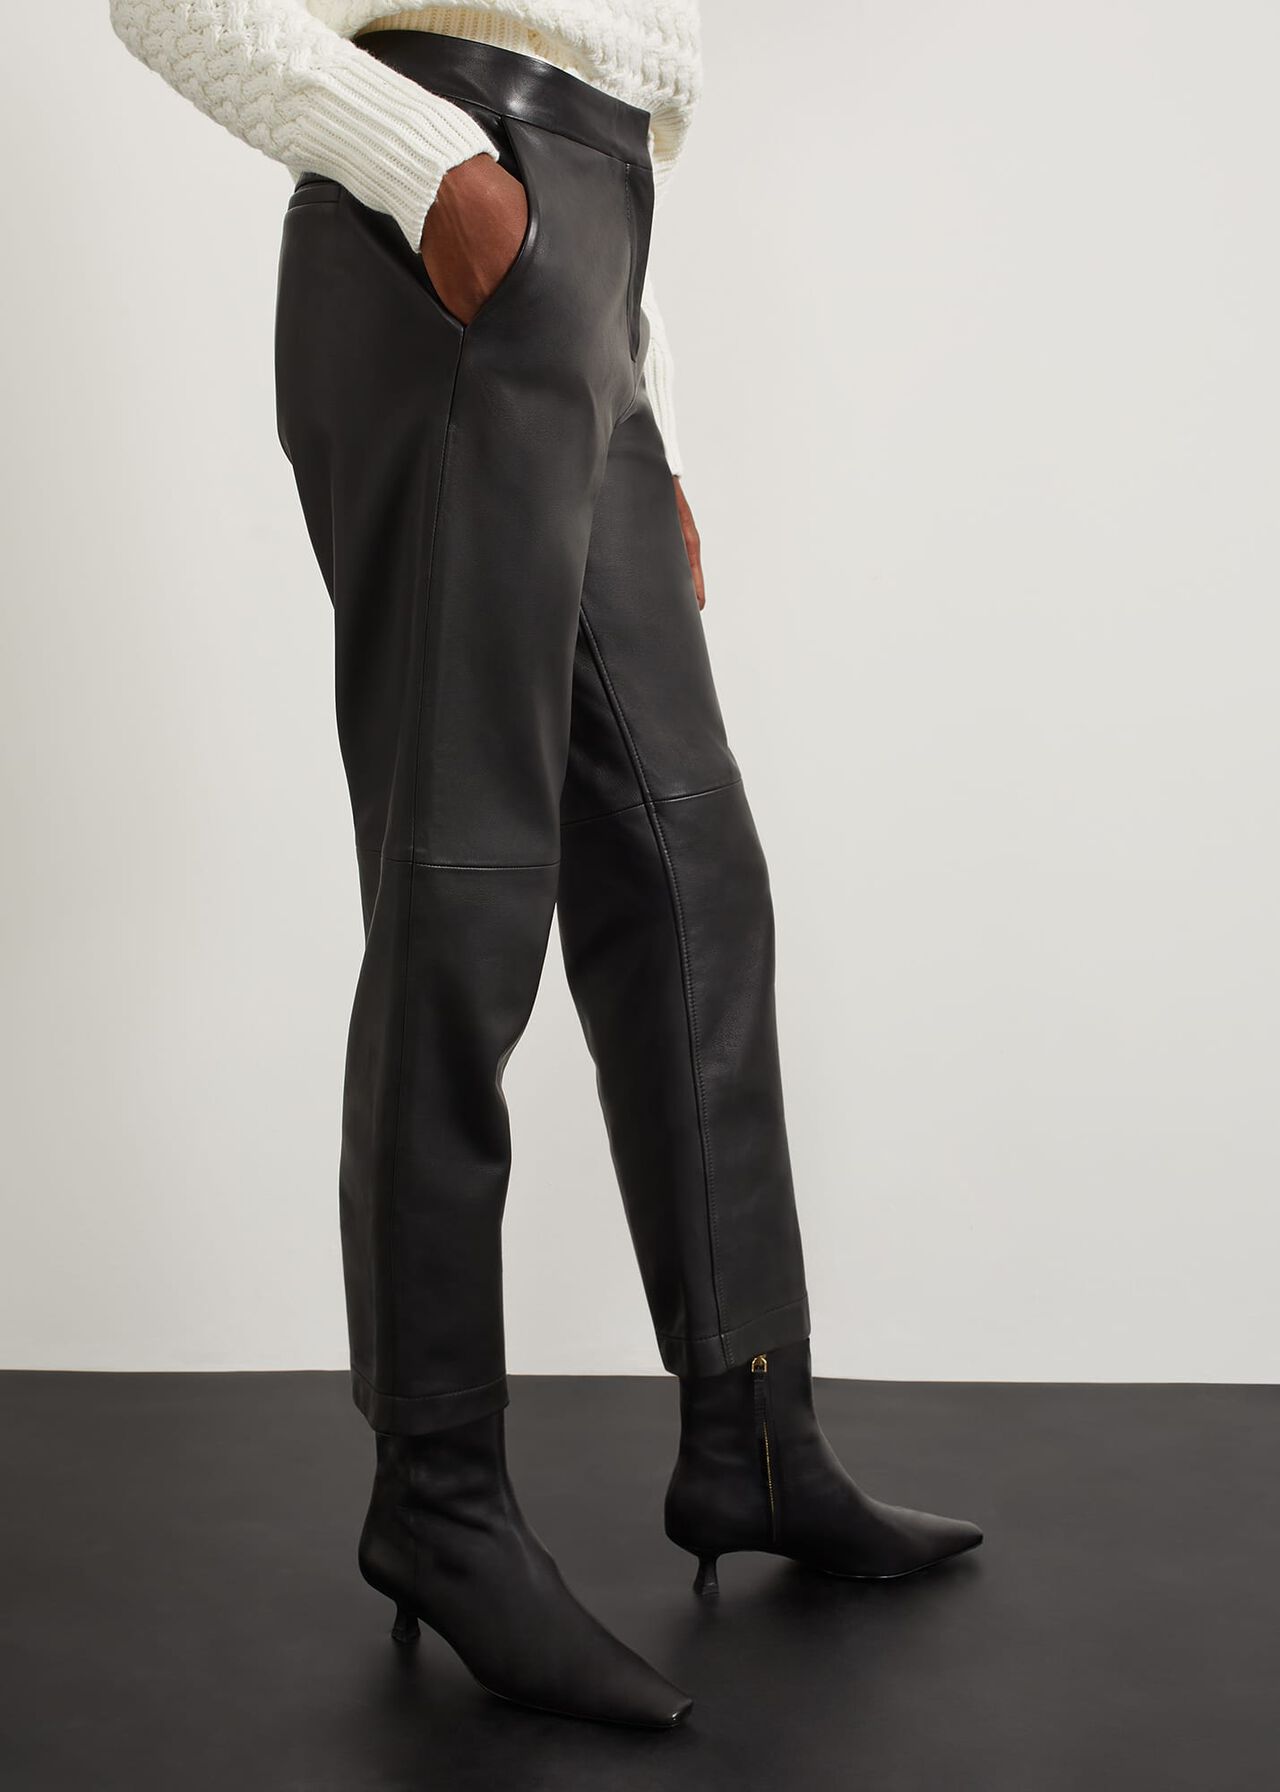 Kinsey Leather Trousers, Black, hi-res